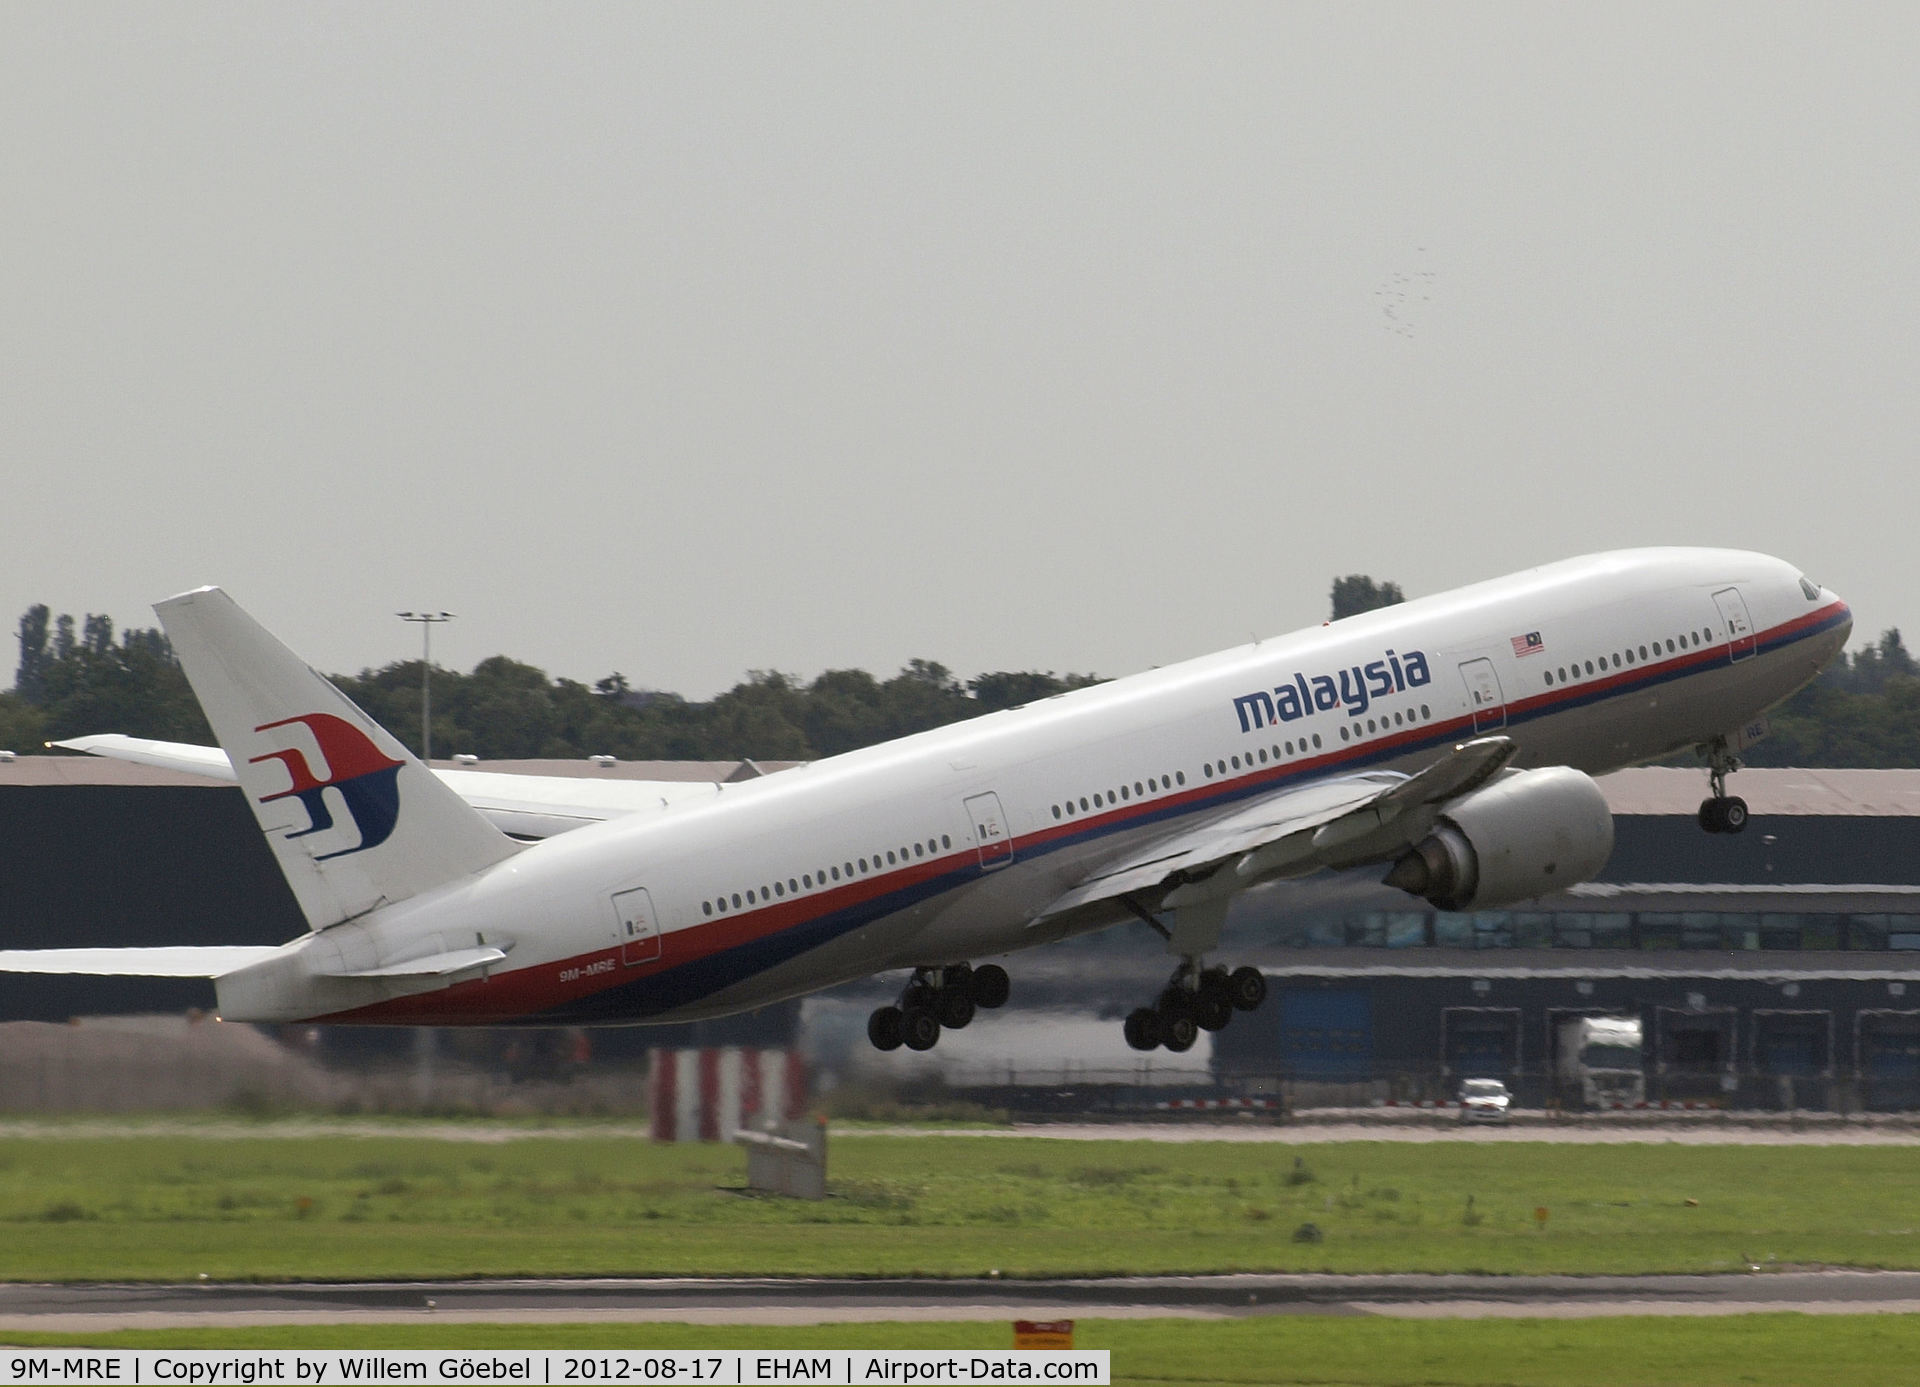 9M-MRE, 1997 Boeing 777-2H6/ER C/N 28412, Take off from runway L18 of Schiphol Airport.